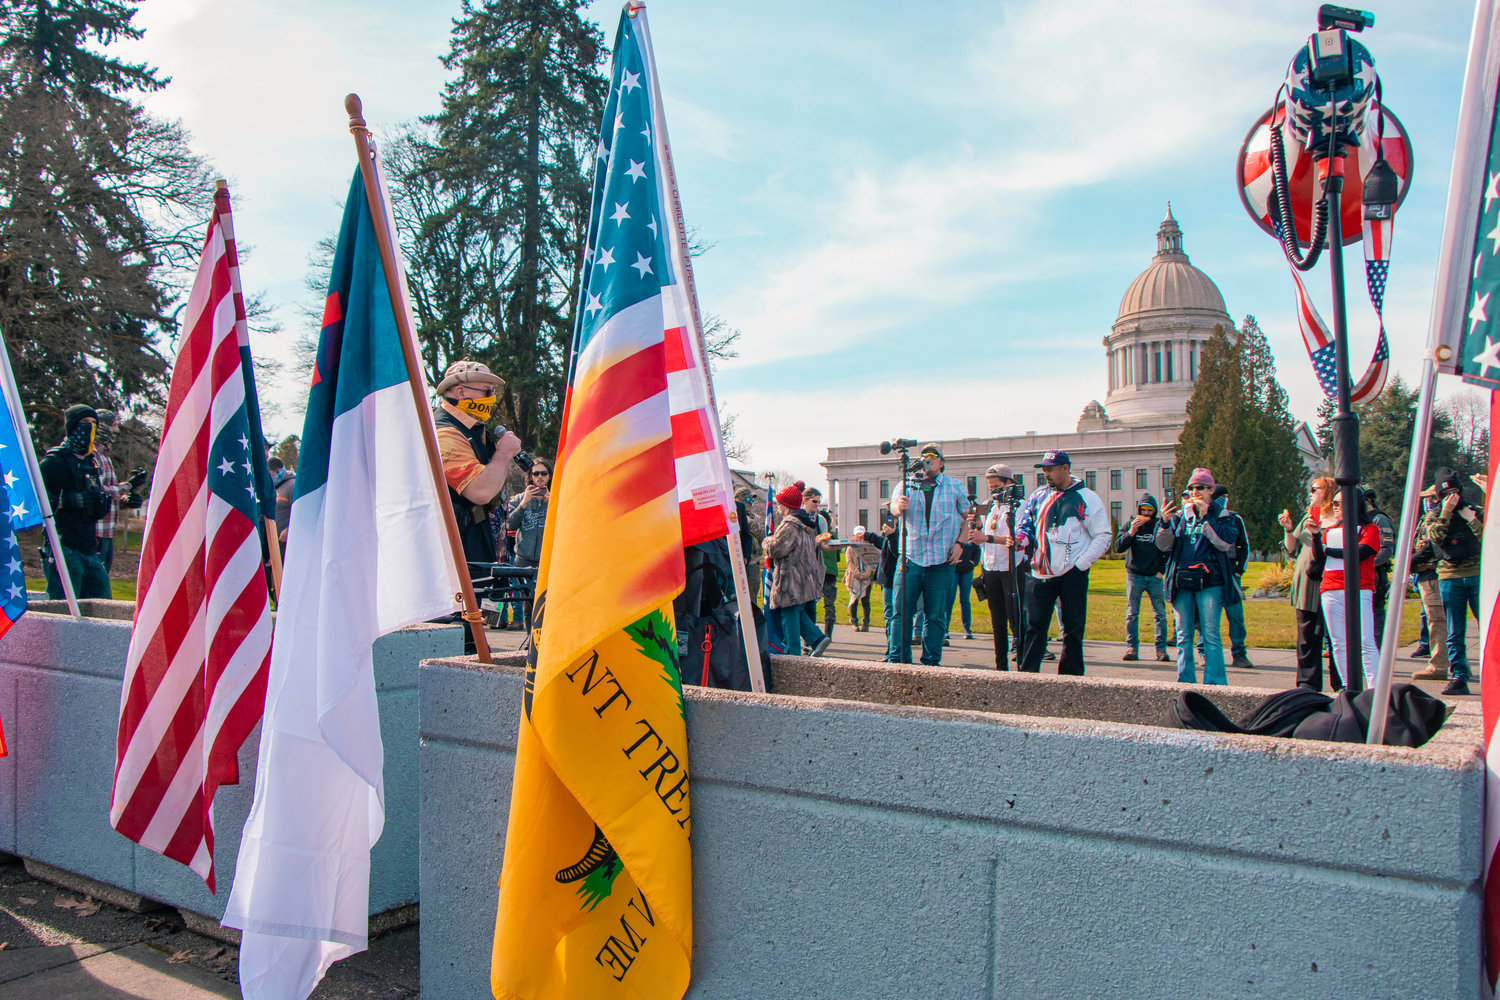 Flags wave as protesters gather for a rally in support of open carry rights near the Washington State Capitol building in Olympia on Saturday.